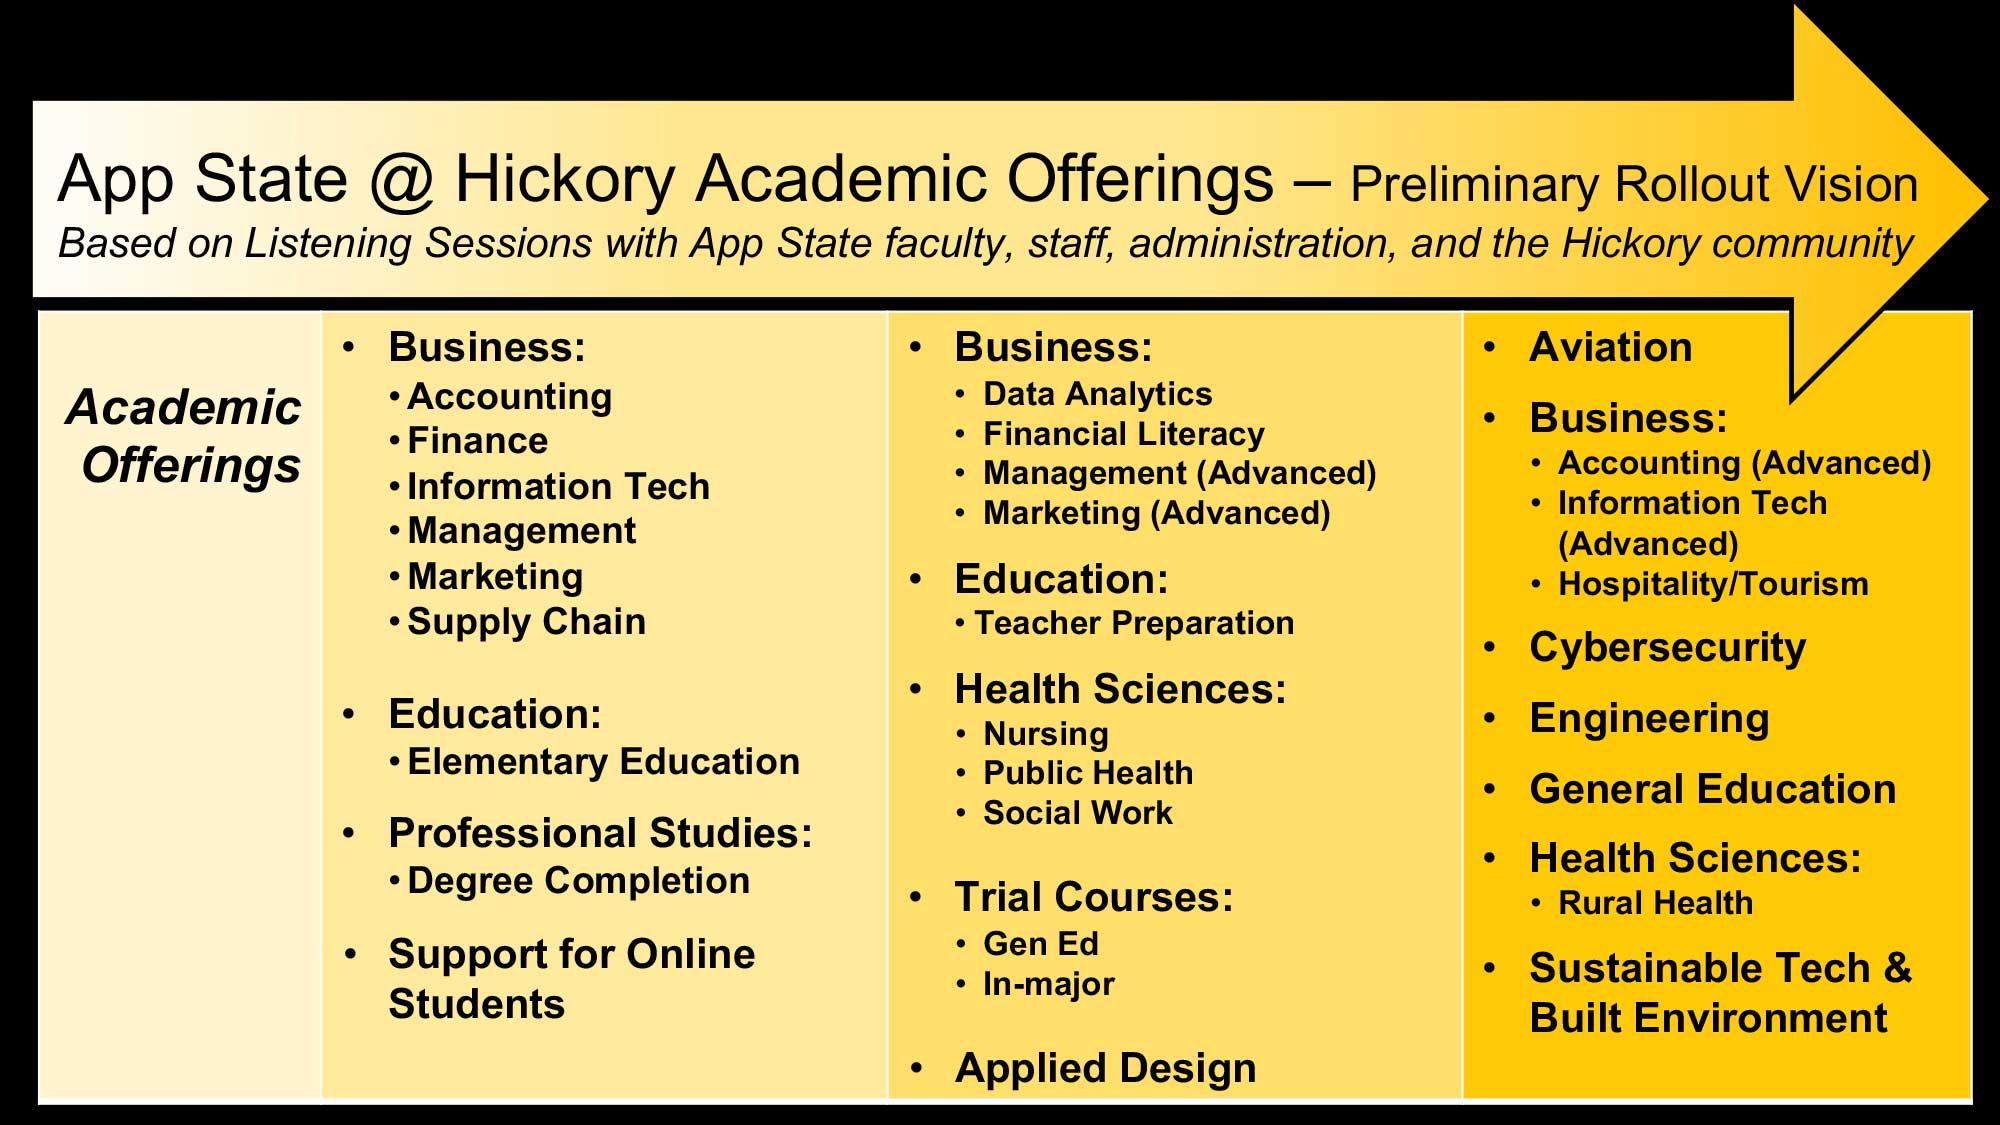 App State at Hickory Academic Offerings – Preliminary Rollout Vision Based on Listening Sessions with App State faculty, staff, administration, and the Hickory community. Academic Offerings: Business including Accounting, Finance, Information Tech, Management, Marketing, Supply Chain Data Analytics, Financial Literacy, Management (Advanced), Marketing (Advanced), Accounting (Advanced), Information Tech (Advanced), and Hospitality/Tourism. Education inclding Elementary Education, Teacher Preparation, and General Education. Professional Studies including Degree Completion. Support for Online Students. Health Sciences including Nursing, Public Health, Social Work and Rural Health. Trial Courses inclduing Gen Ed and In-major. Applied Design, Aviation, Cybersecurity, Engineering as well as Sustainable Technology and the Built Environment.